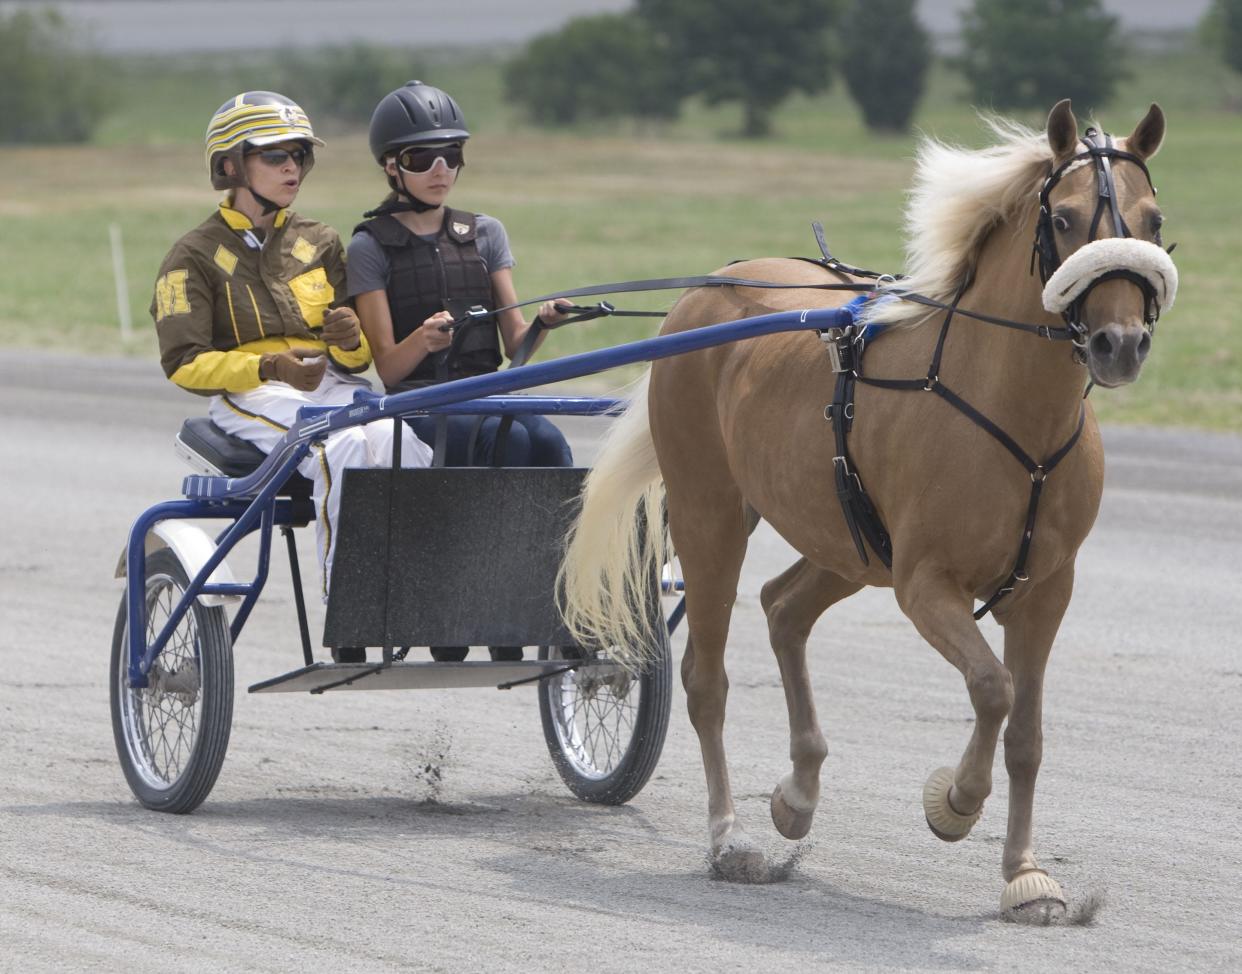 Students at the Harness Horse Youth Camp at Gaitway Farm in Manalapan learn how to care for, train and drive horses in this 2011 file photo.